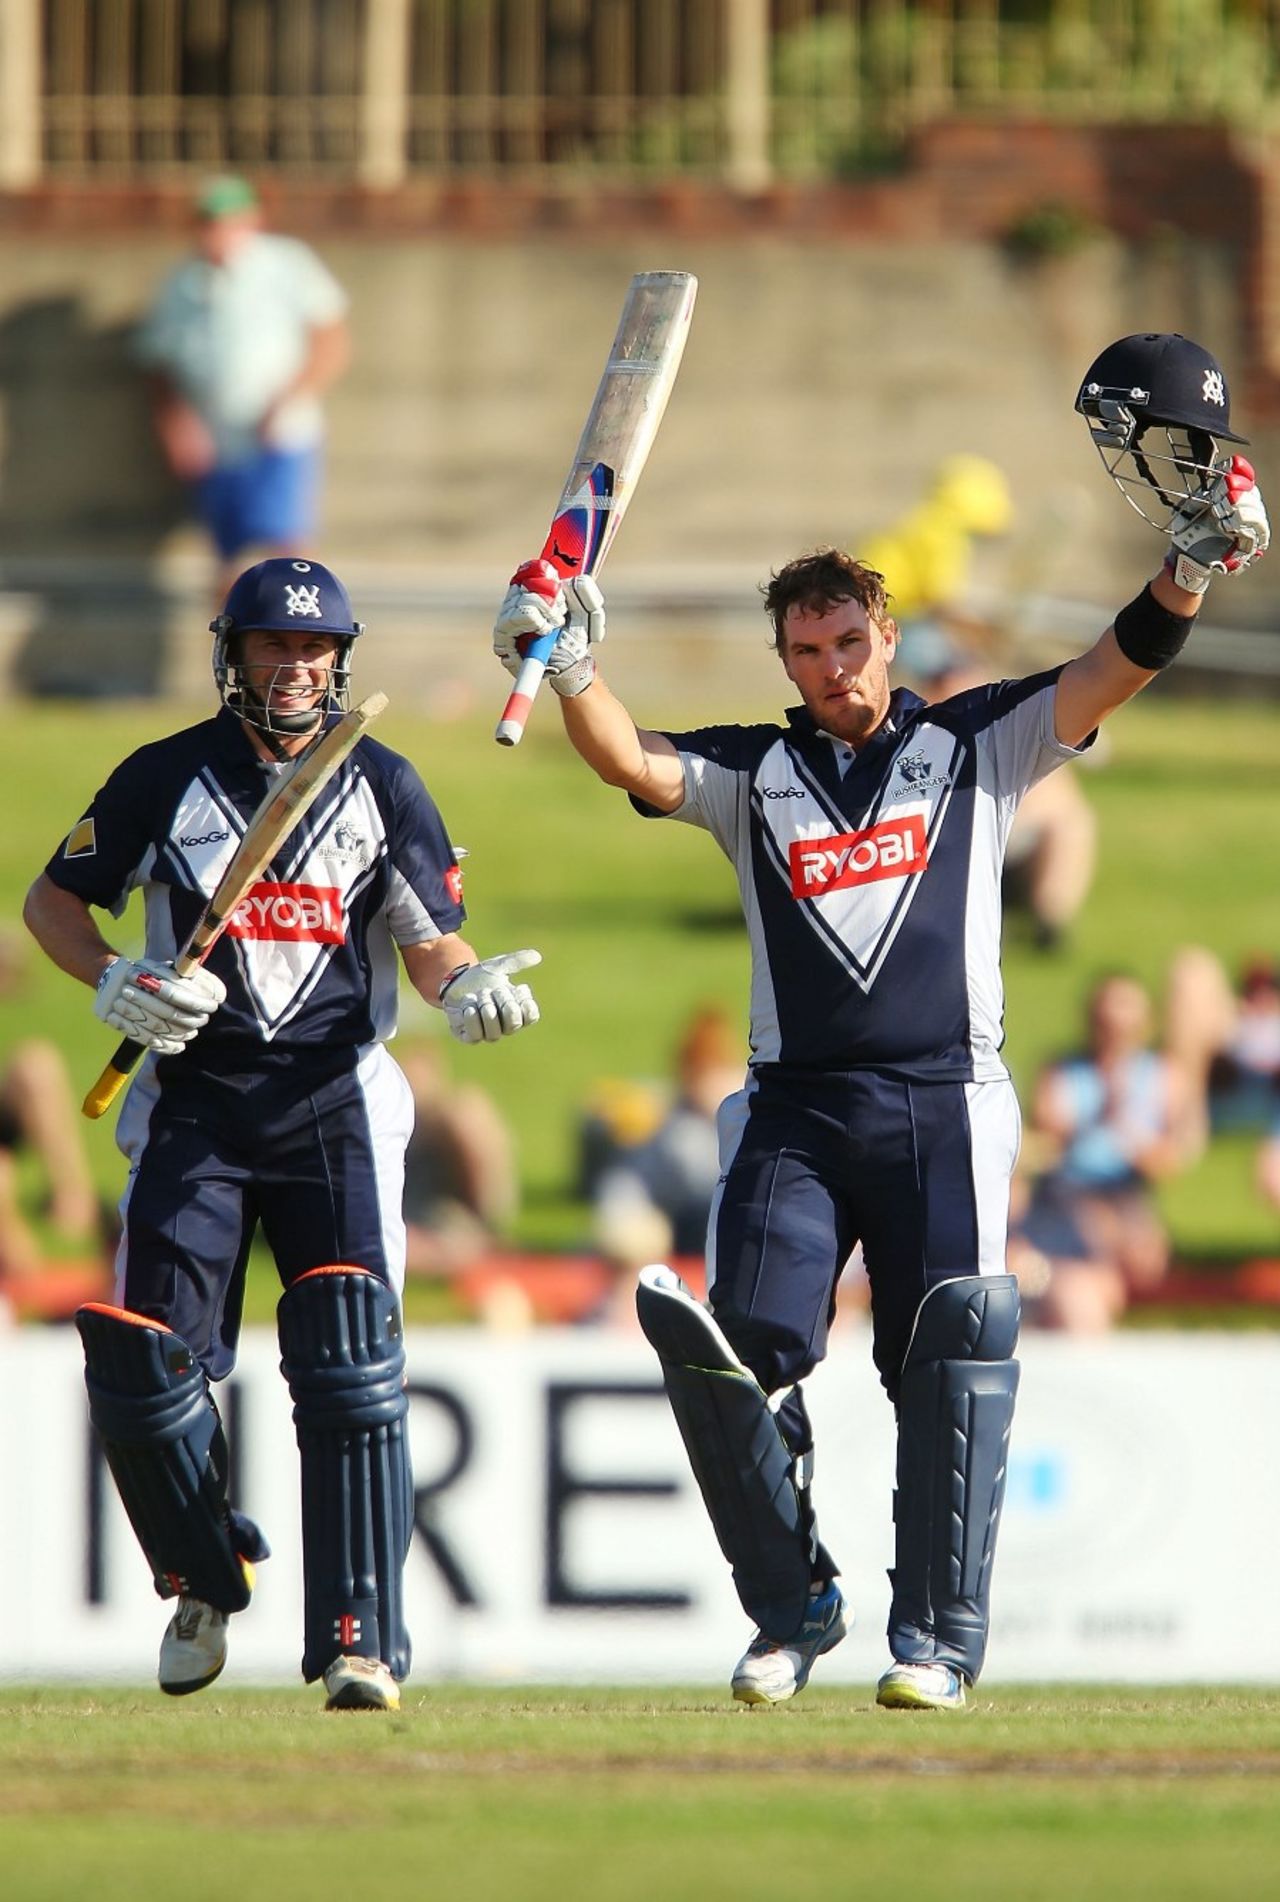 Aaron Finch and David Hussey both scored centuries, New South Wales v Victoria, Ryobi Cup, North Sydney Oval, November 18, 2012